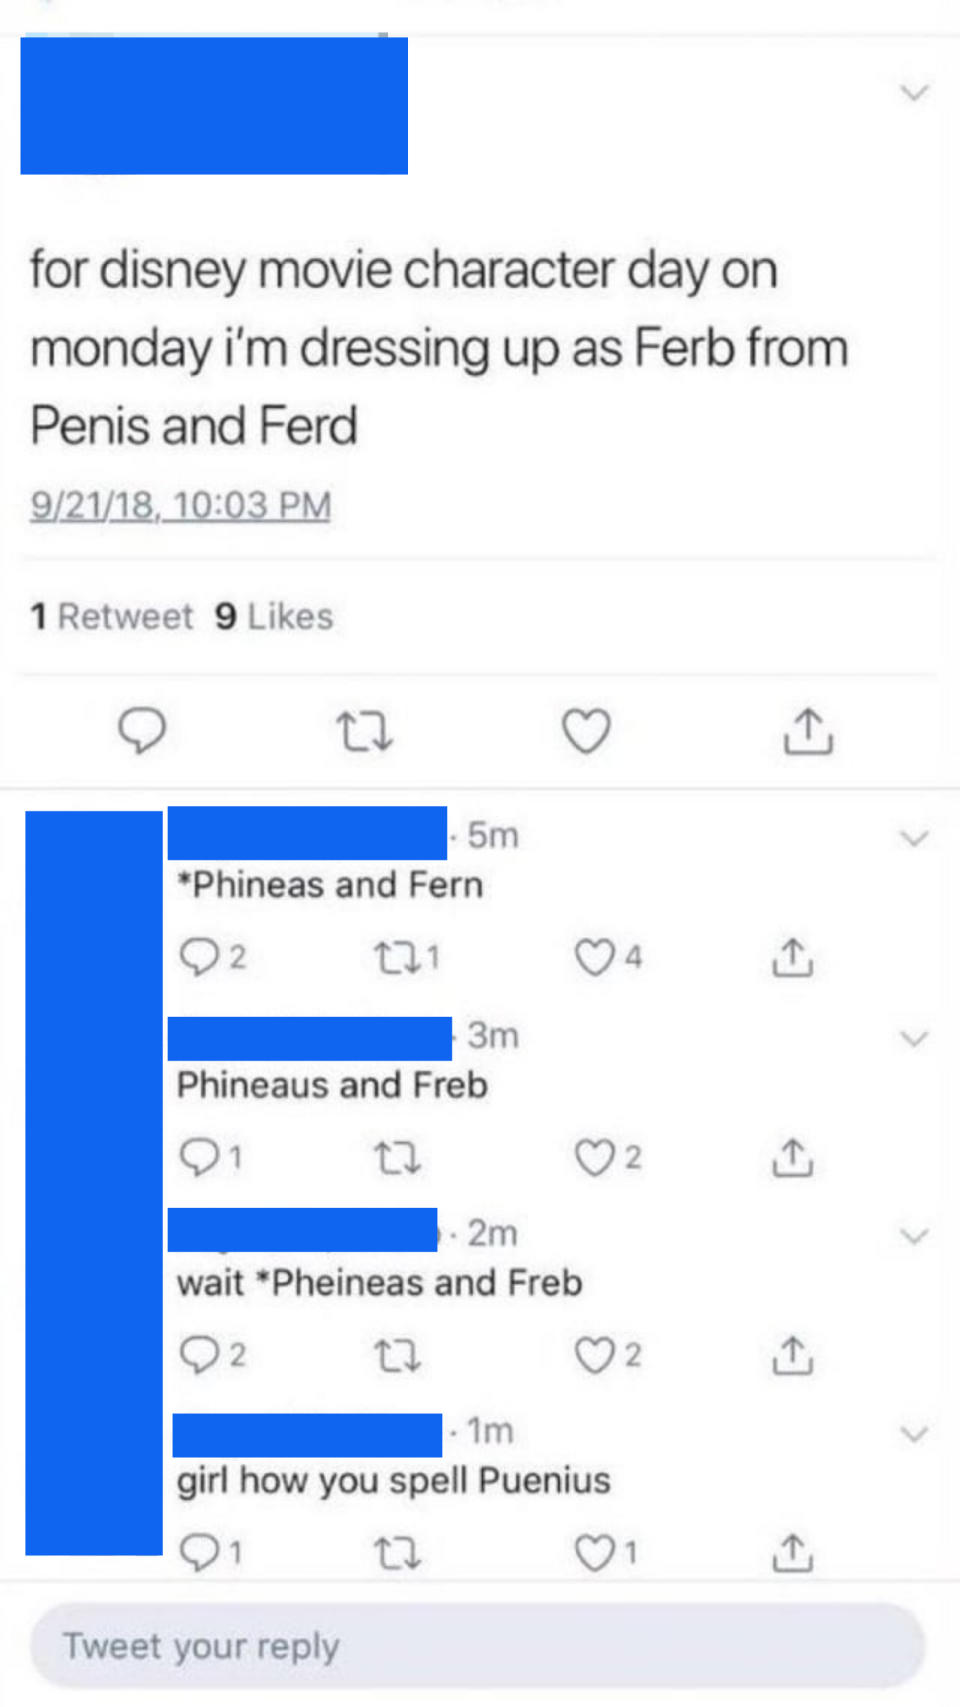 Tweet from user discussing plans to dress as Ferb for Disney movie character day, but they continuously misspell Phineas as Puenius